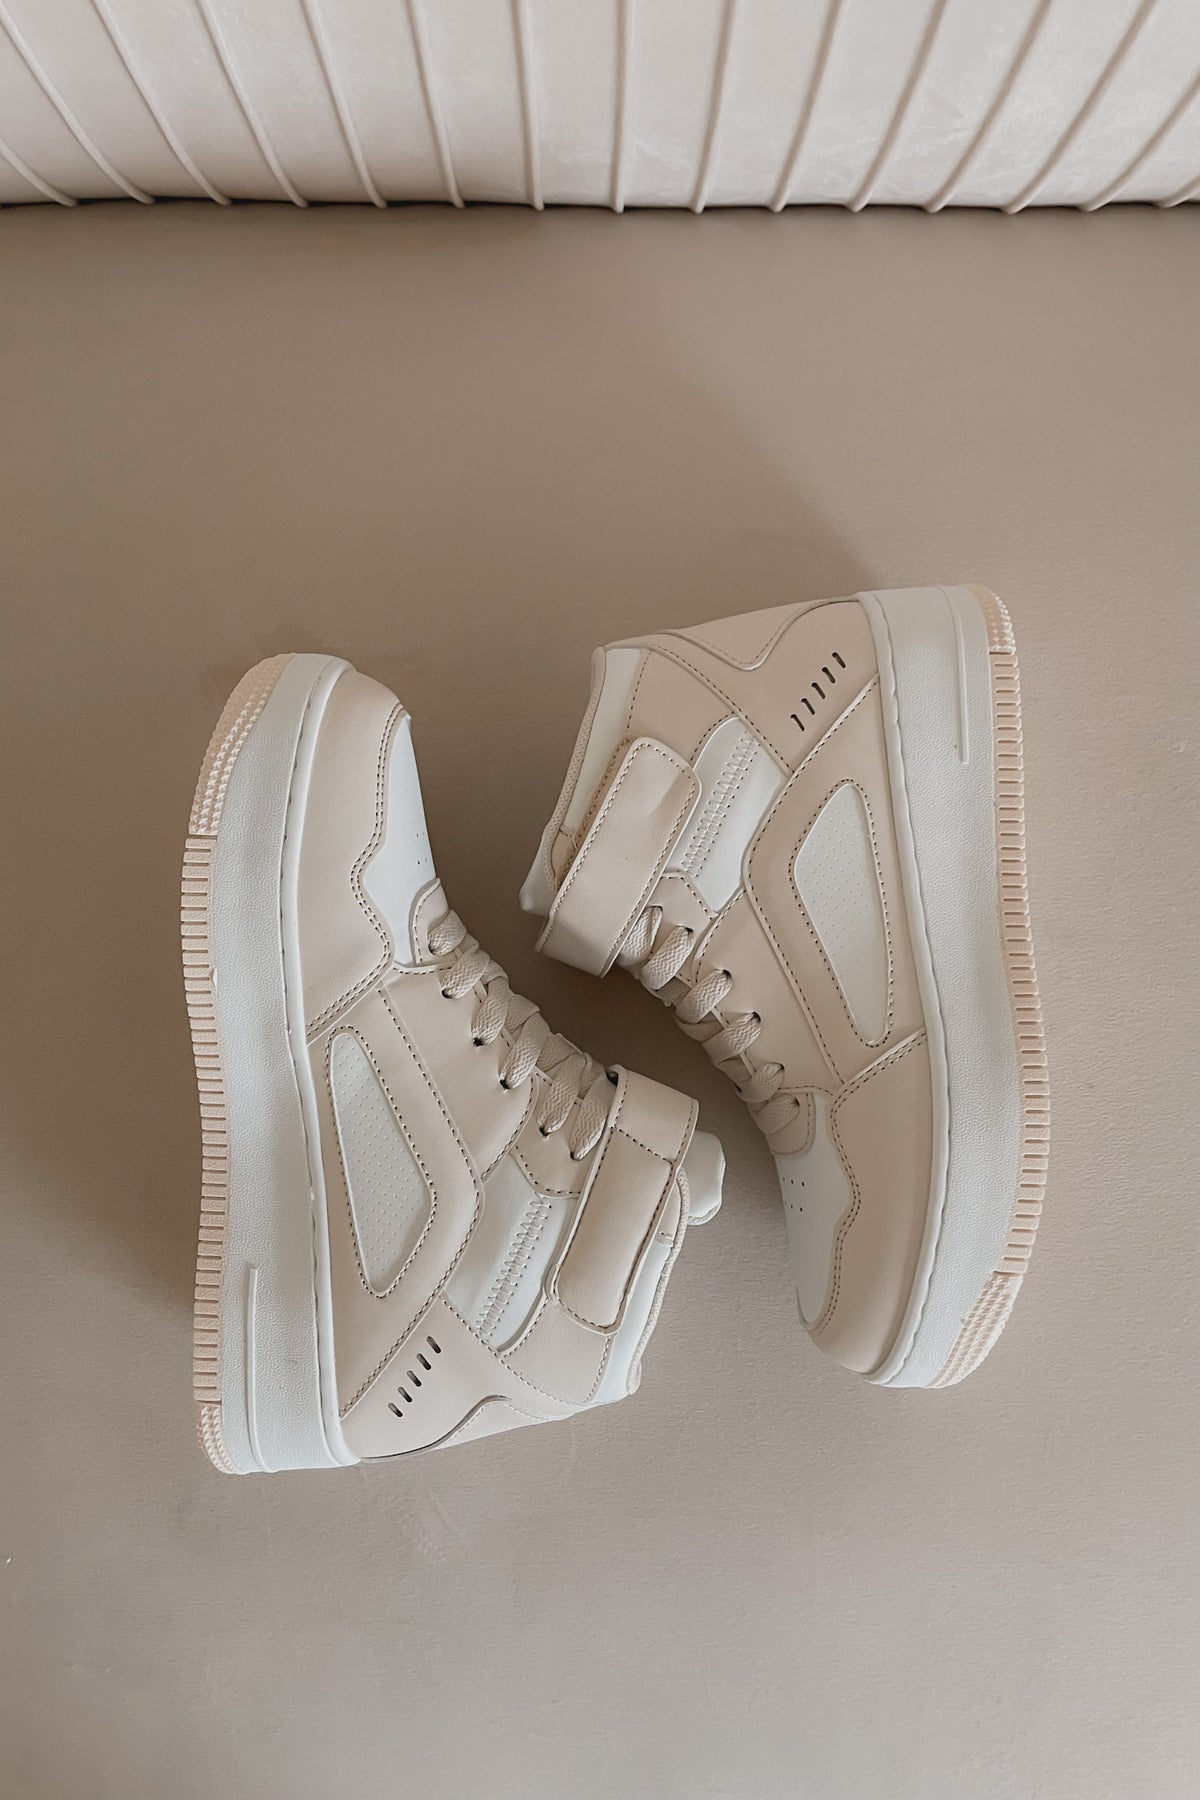 simple sneakers - no logo sneakers - beige and white